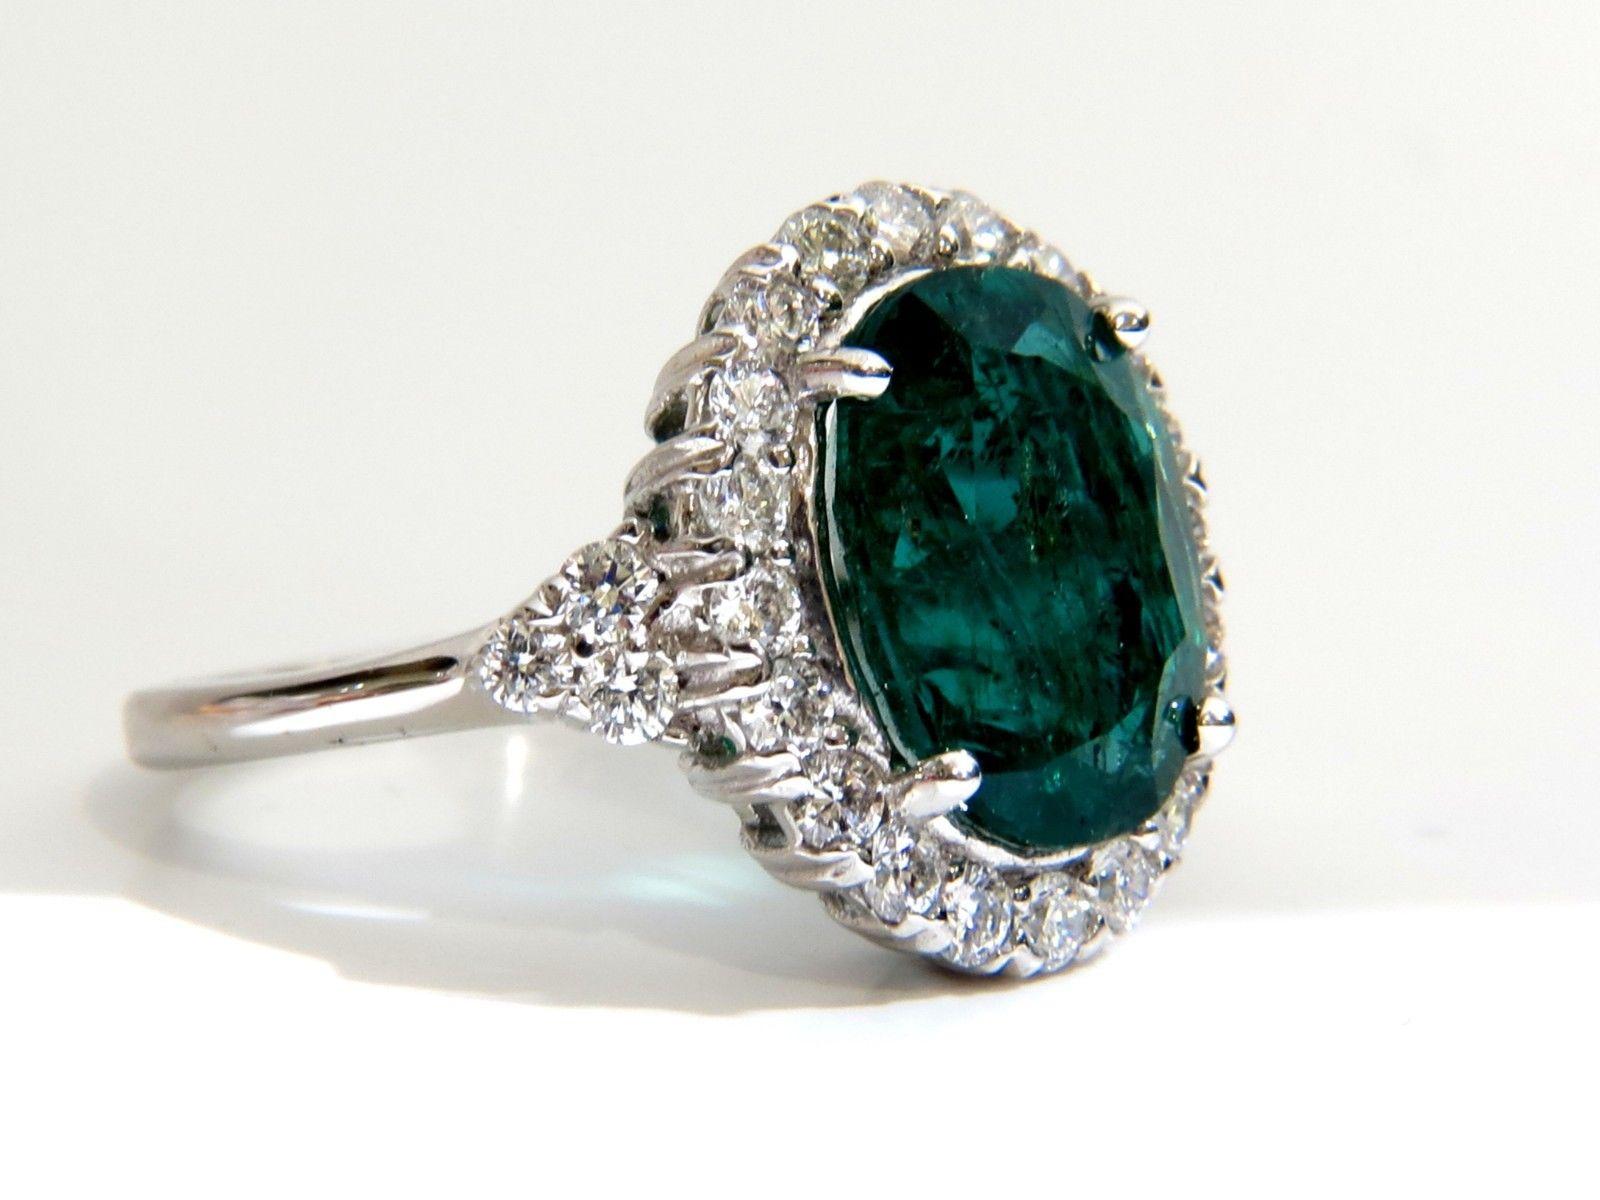 4.10ct. Natural emerald & 1.10ct. diamonds ring.

Round cut emerald, Excellent Clean Clarity

Brilliant Vivid Bright Green sparkles from all angles

Pristine Transparency

12.4 x 9.3mm 



1.10cts of Side round cut diamonds: 

Vs-2 clarity